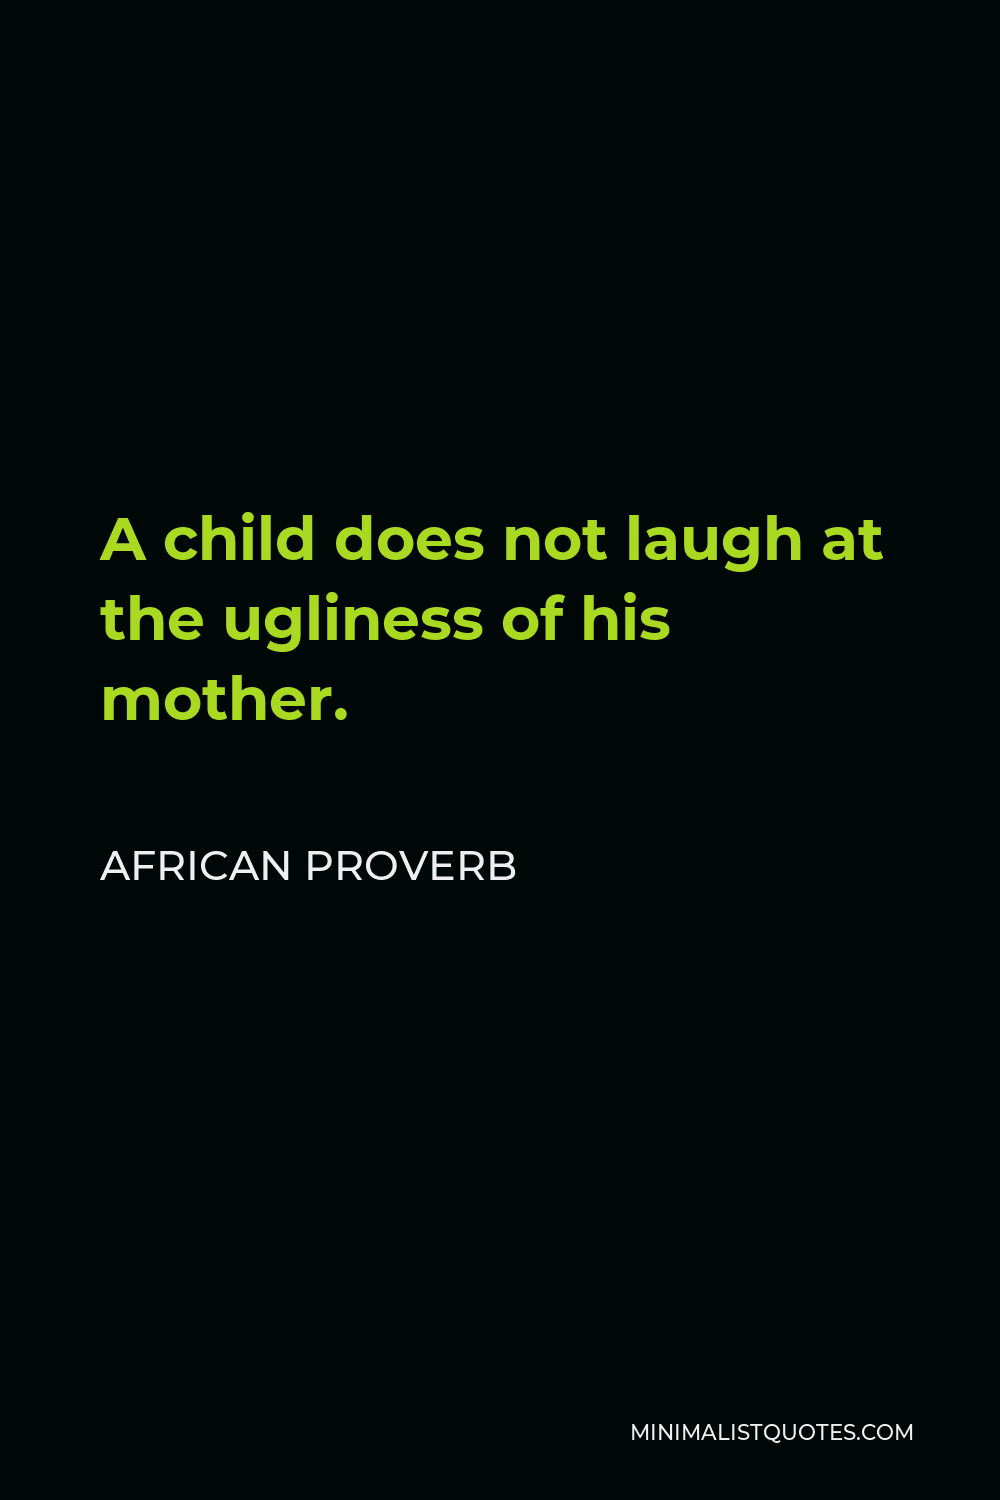 African Proverb Quote - A child does not laugh at the ugliness of his mother.